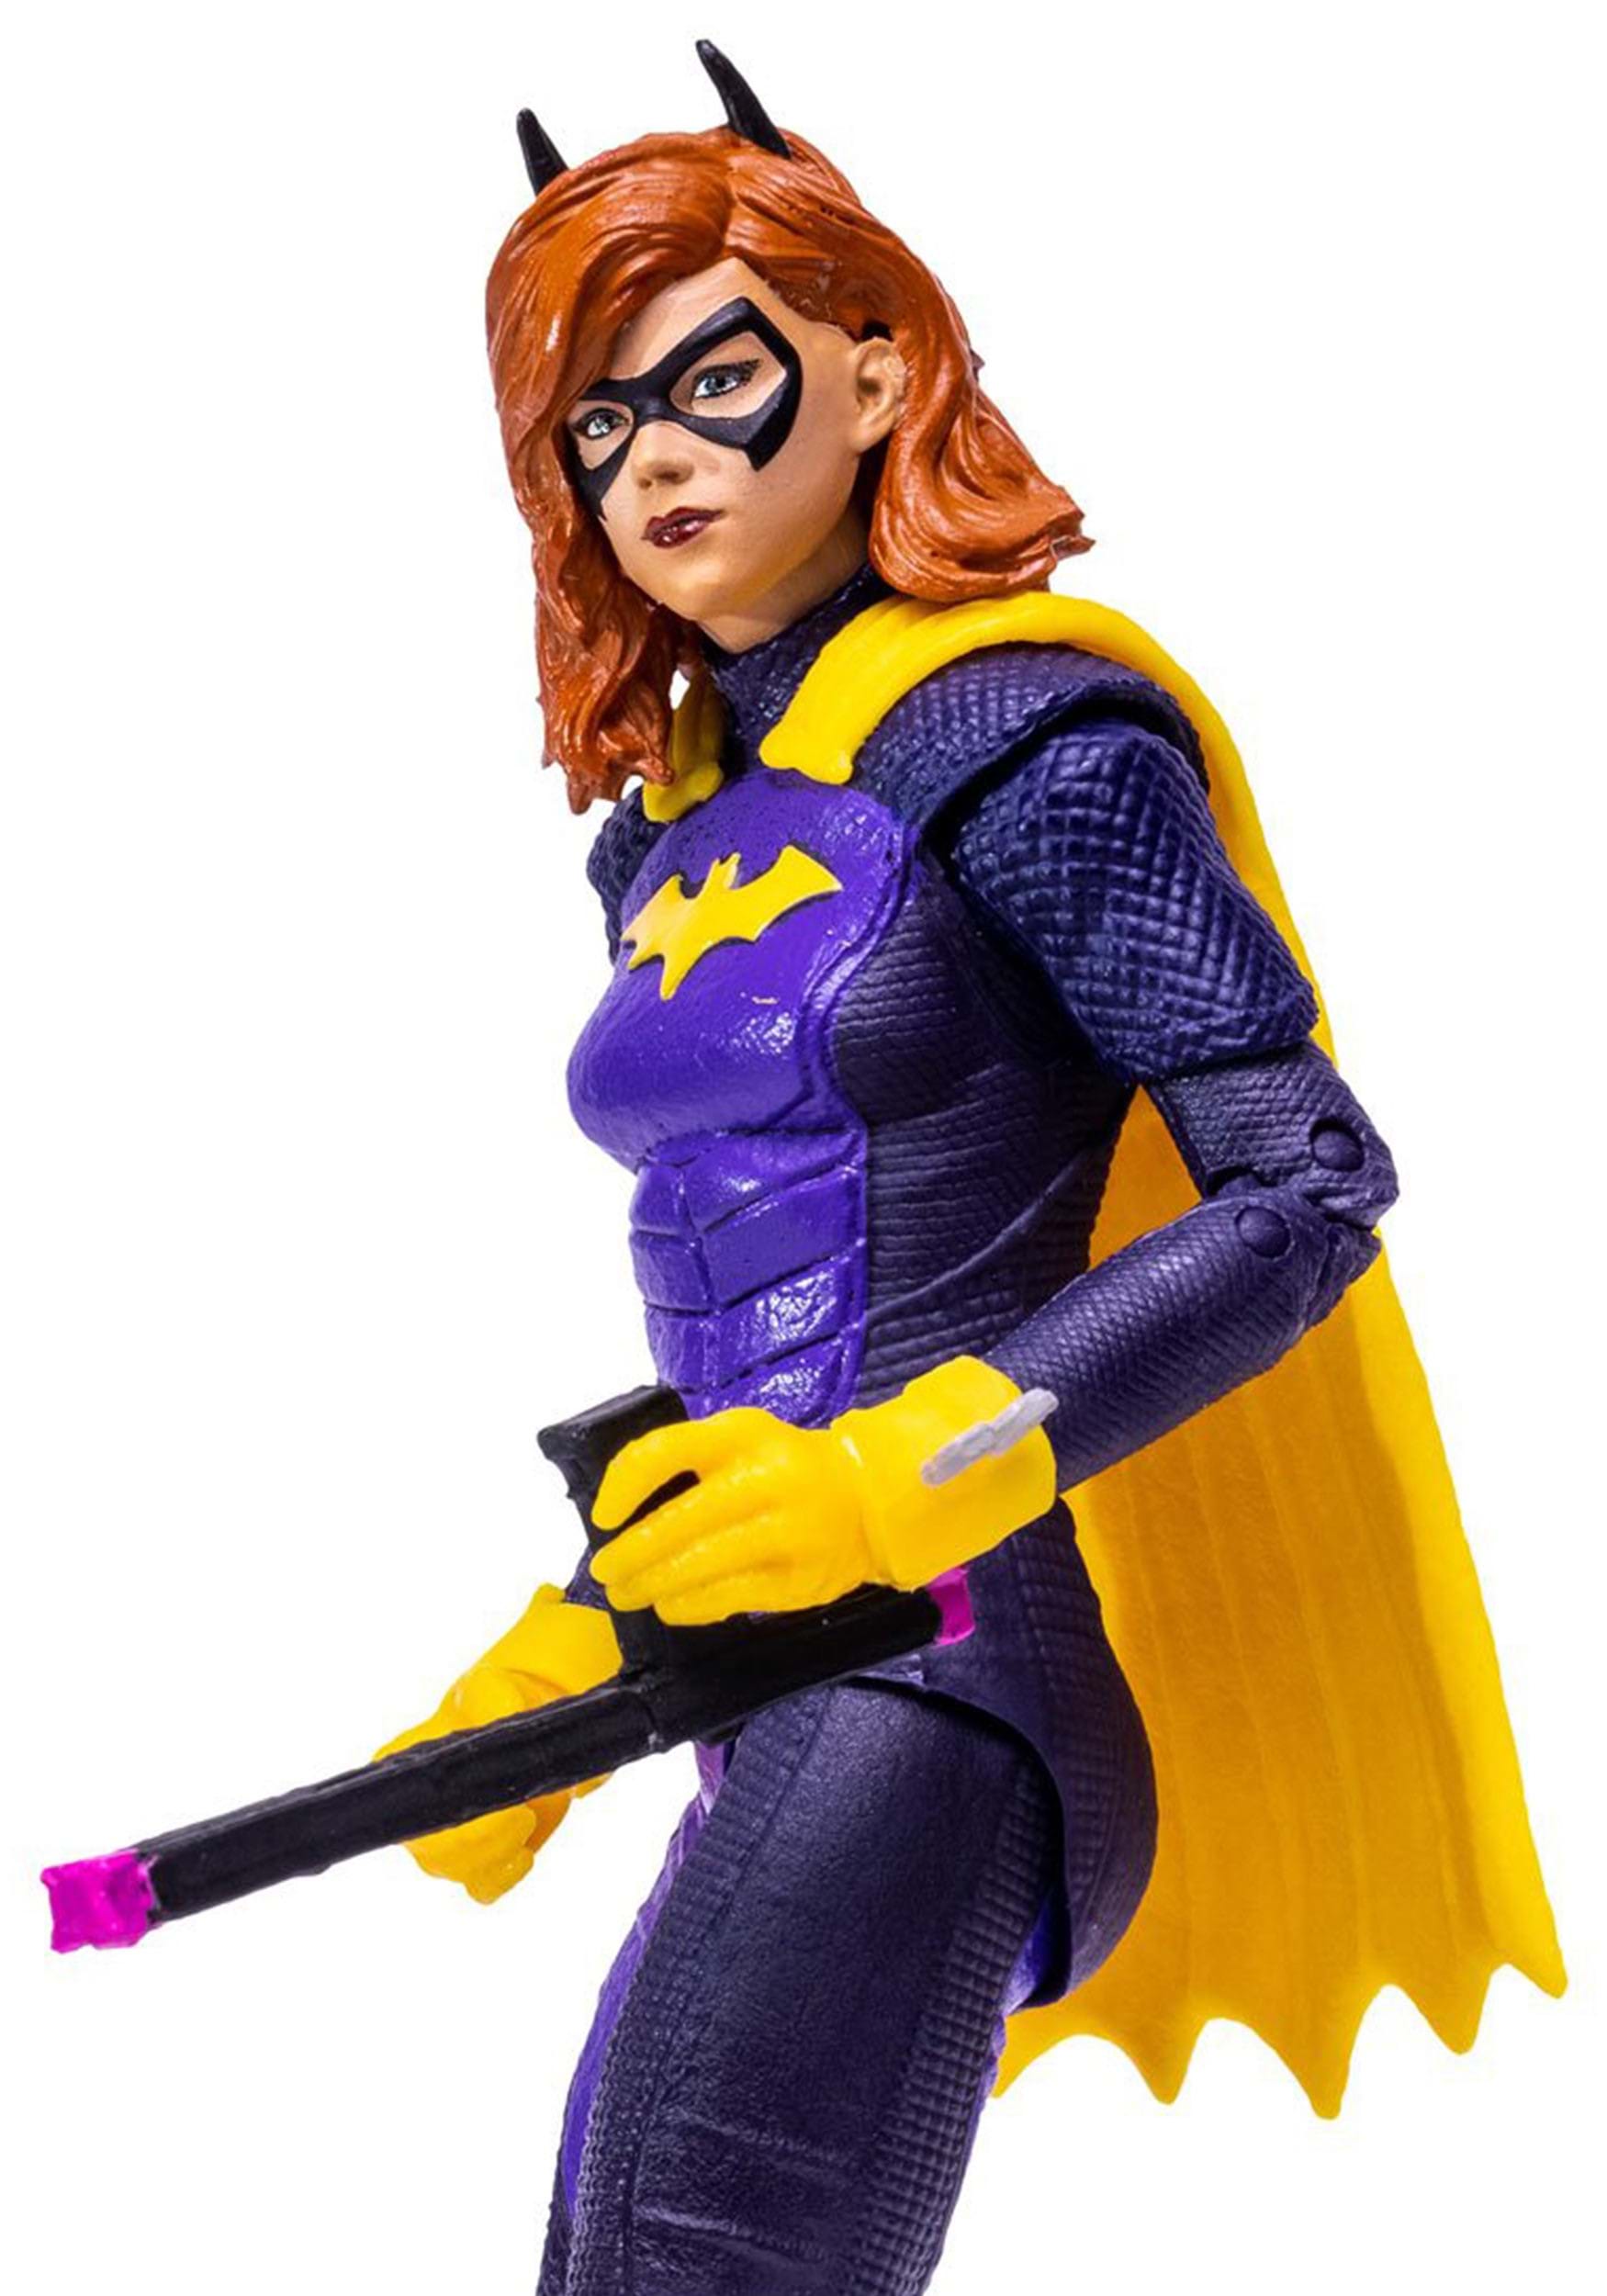 DC Gaming Wave 6 Gotham Knights Batgirl 7-Inch Scale Action Figure